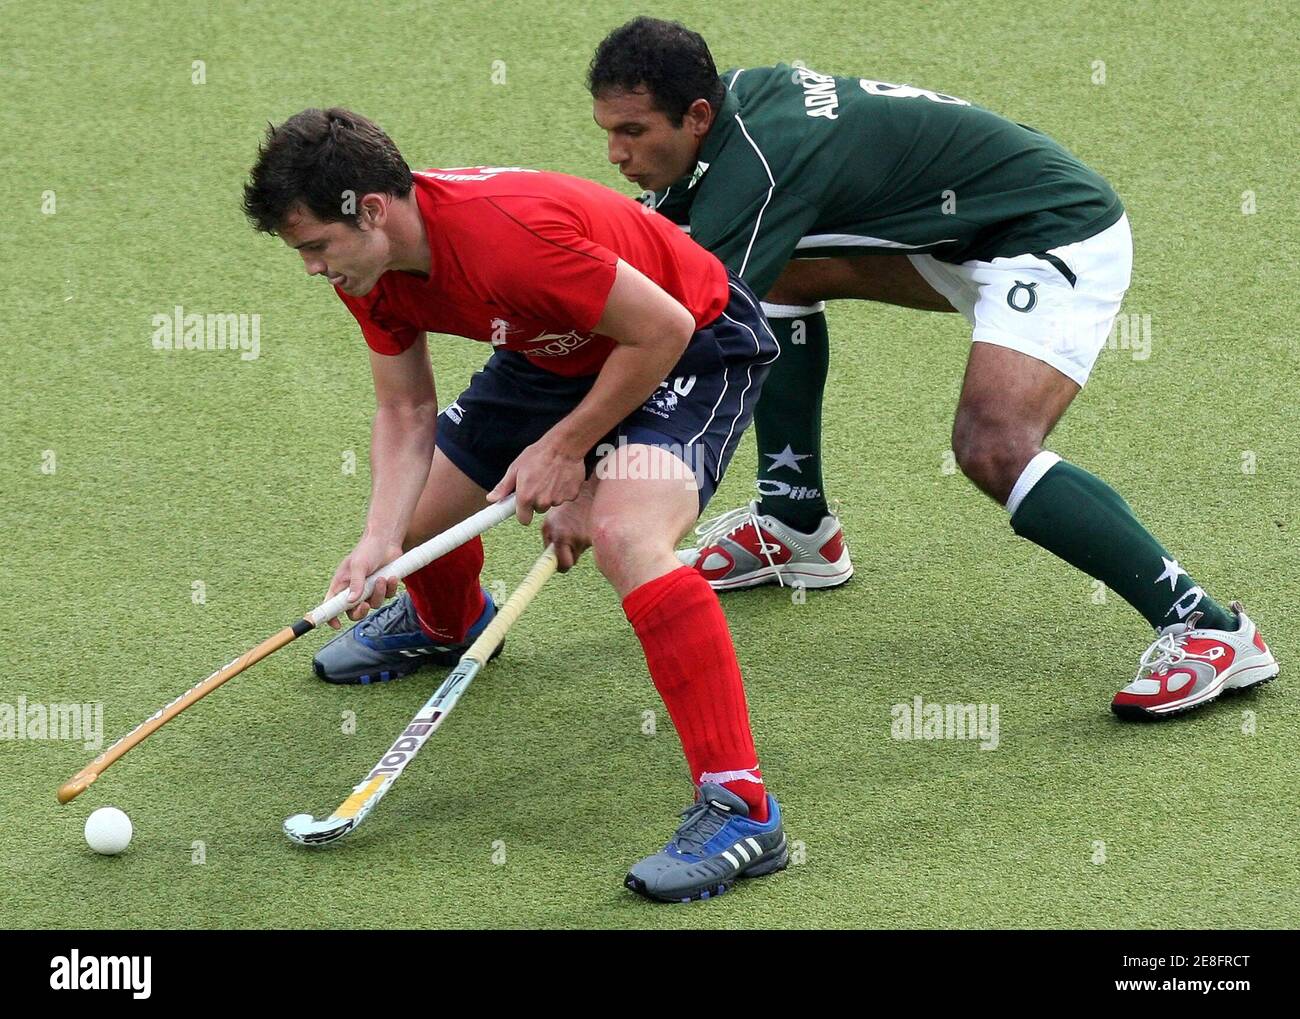 England's James Tindall (L) fights for the ball with Pakistan's Adnan Maqsood during their Men's Field Hockey World Cup match at the Warsteiner Hockey Park stadium in Moenchengladbach September 16, 2006. REUTERS/Pascal Lauener  (GERMANY) Stock Photo